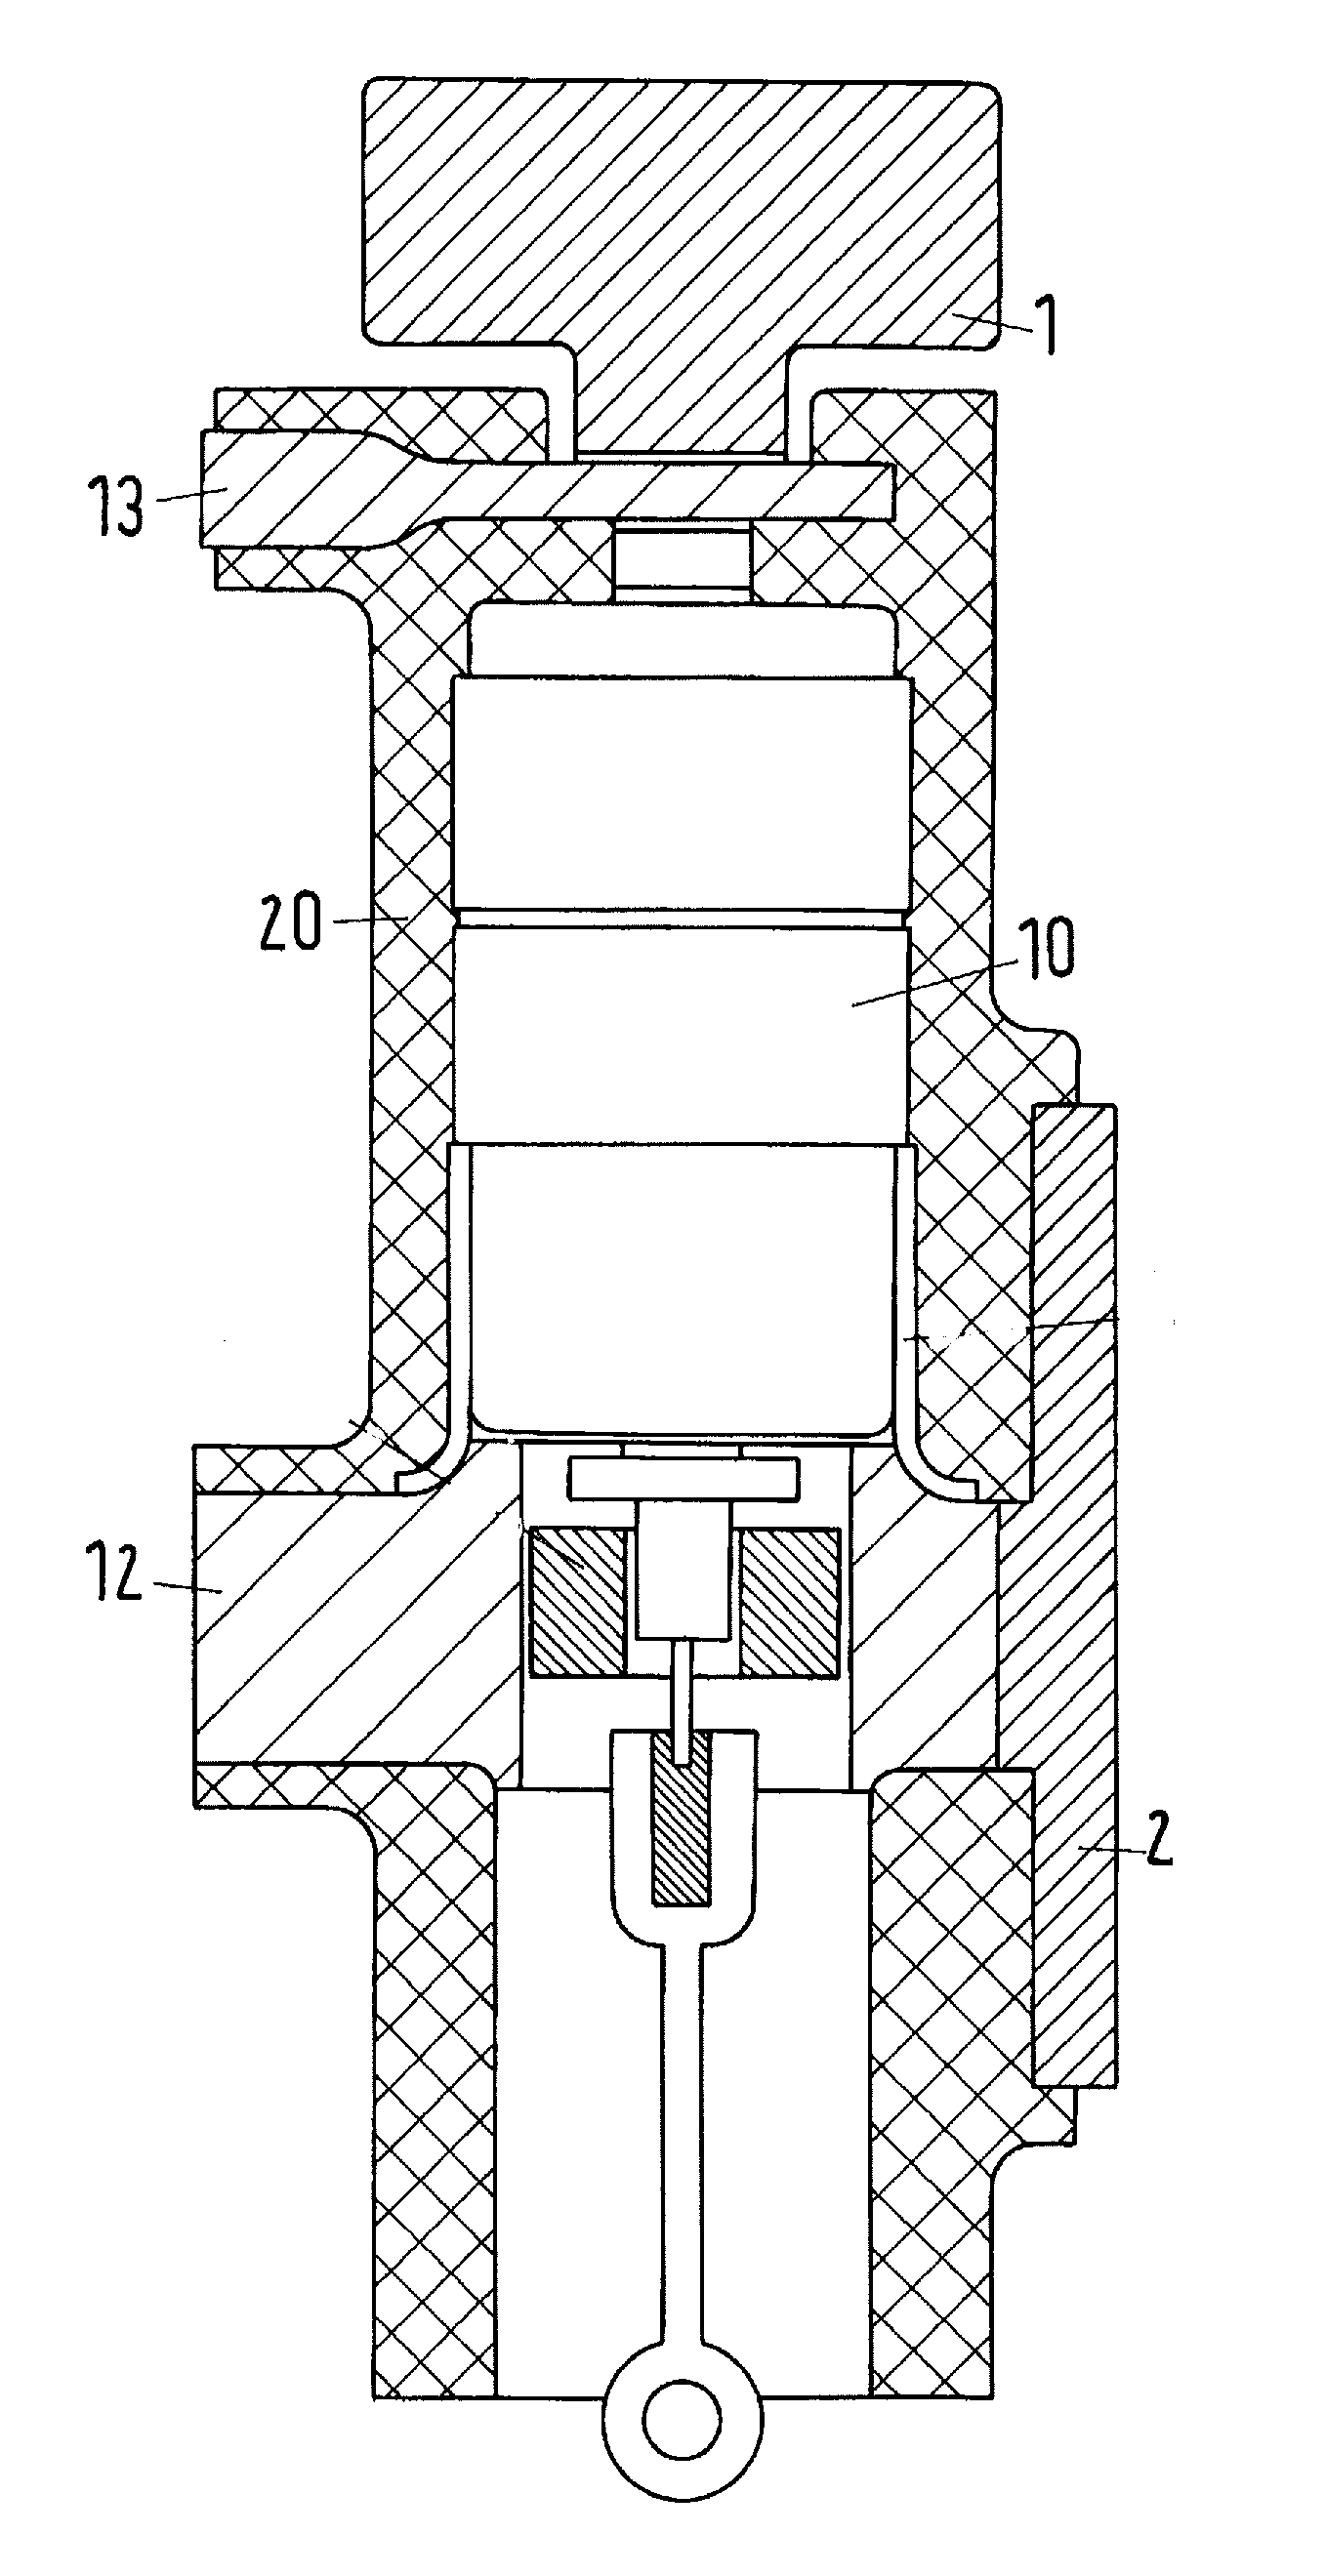 Pole part of a medium-voltage or high-voltage switch gear assembly, and method for its production